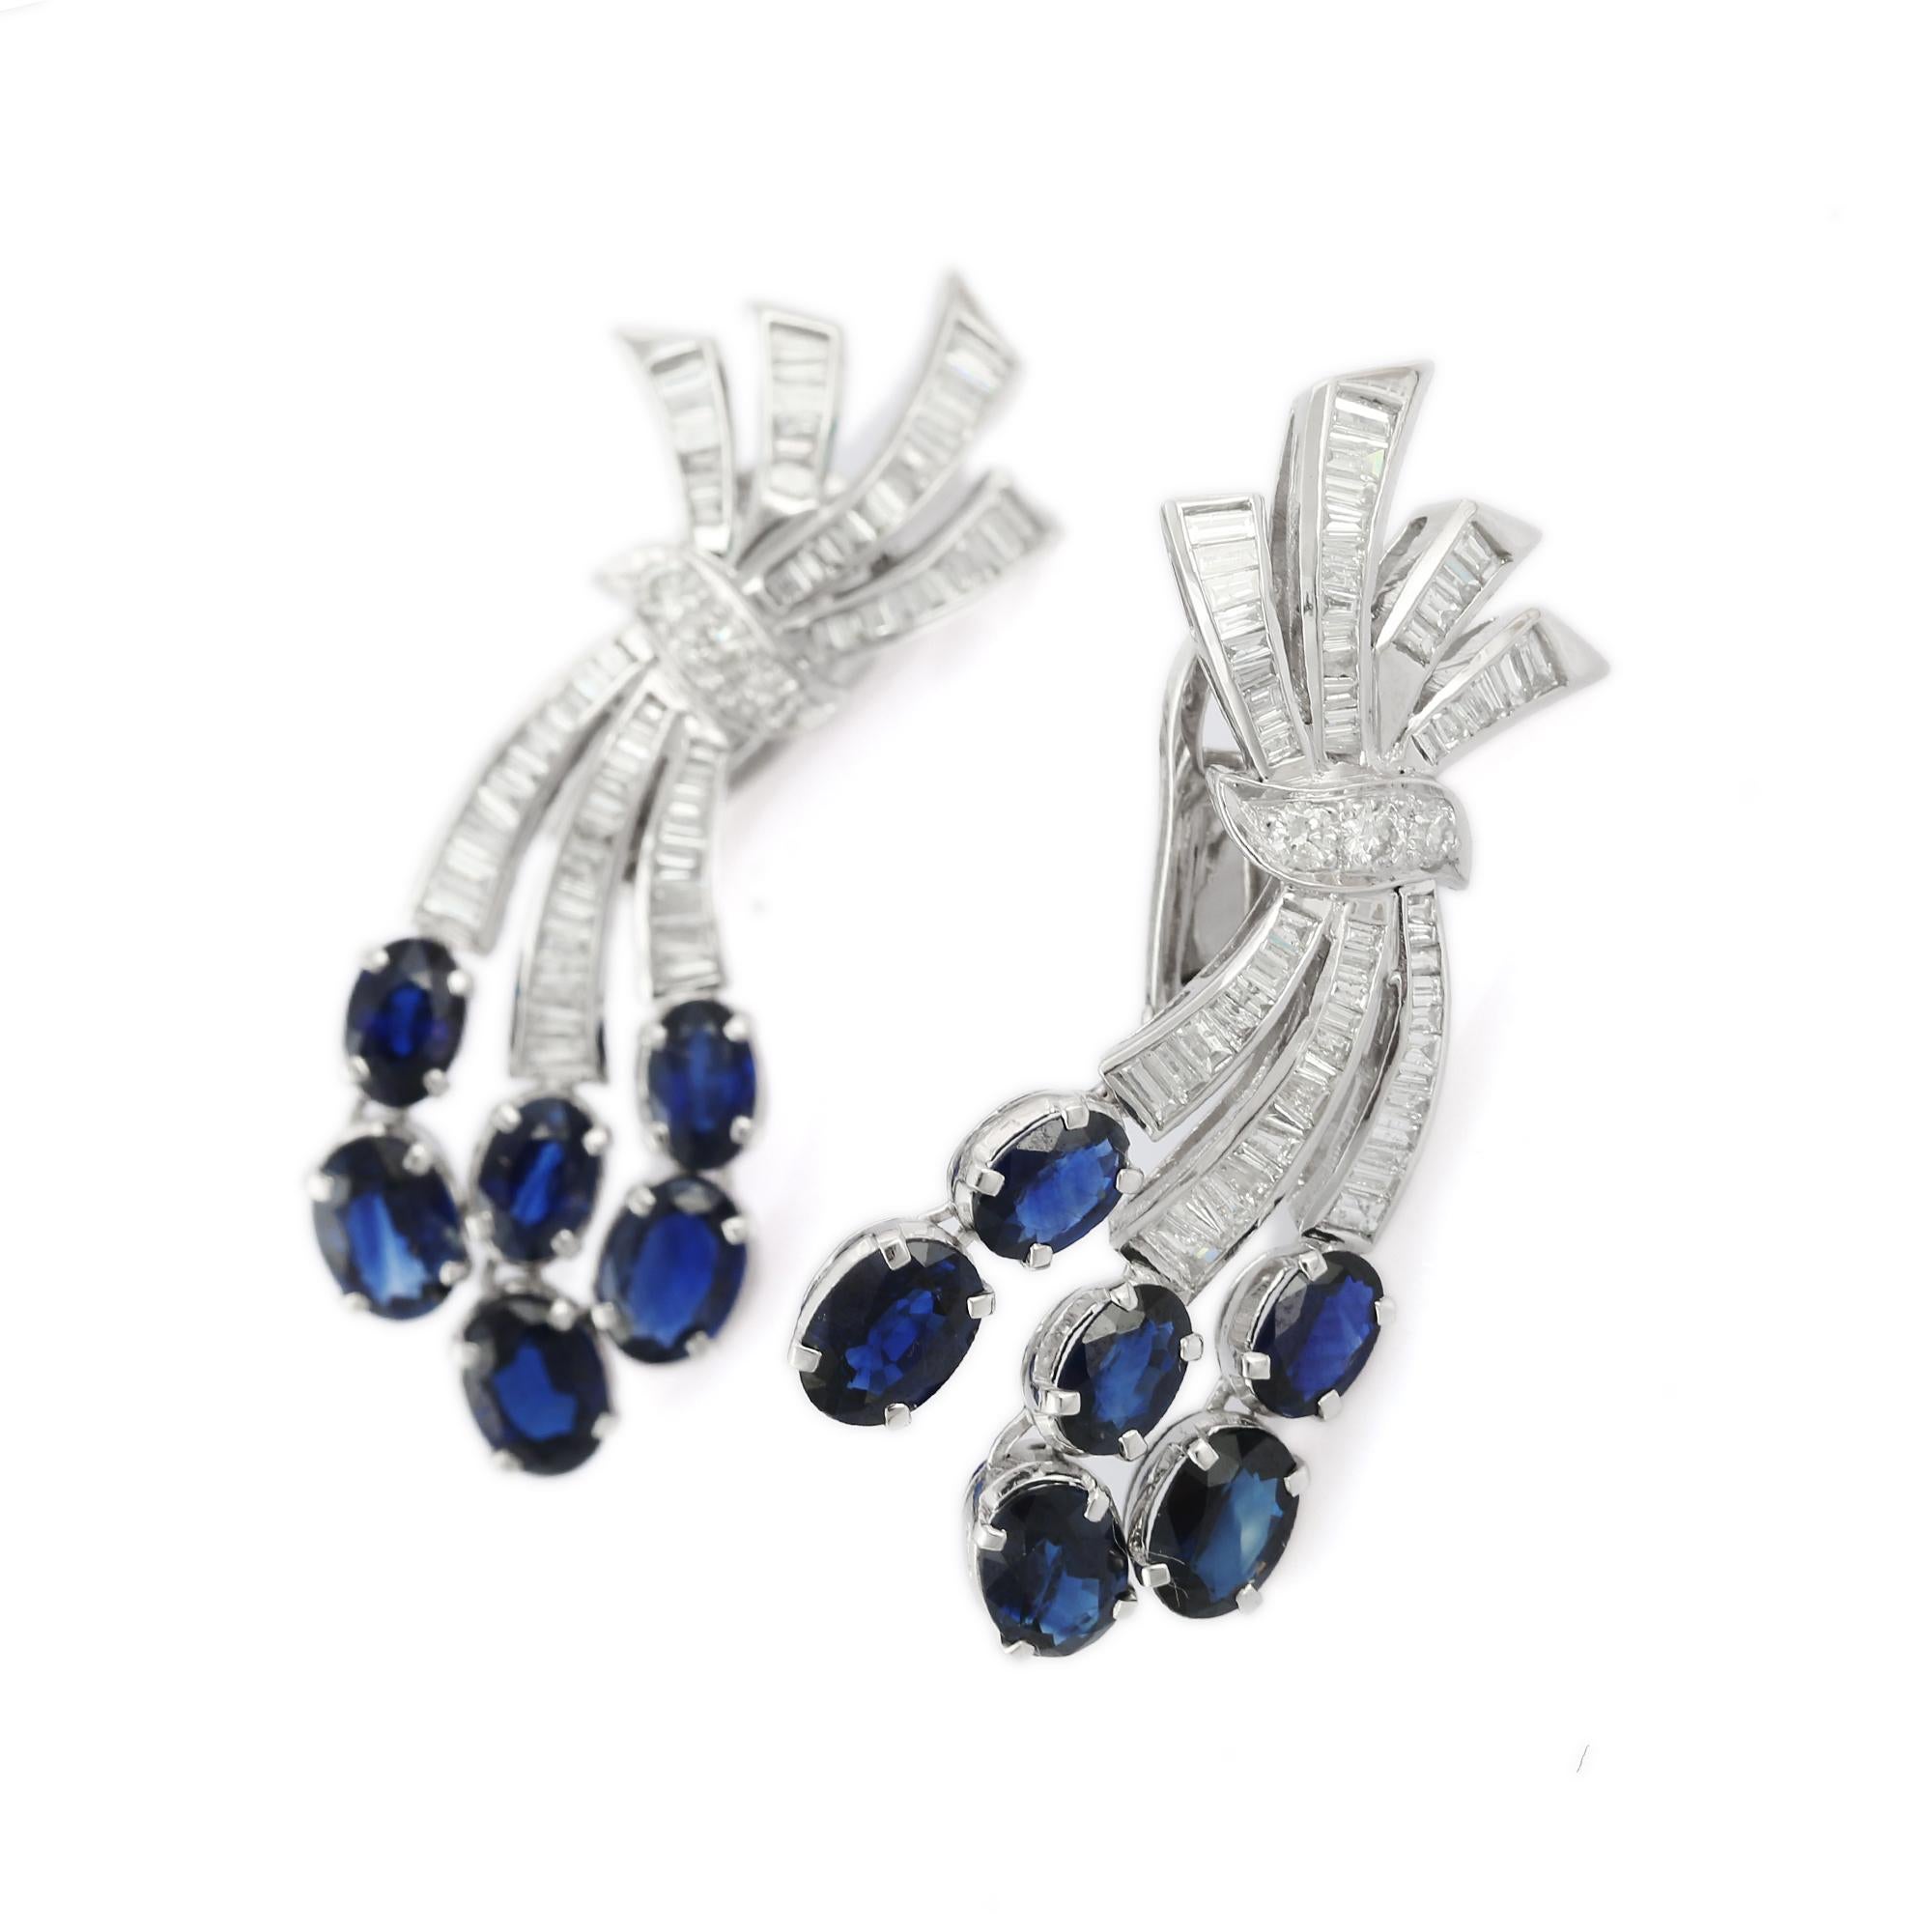 Contemporary 8.6 Carat Dangle Sapphire and Diamond Earrings in 18K White Gold For Sale